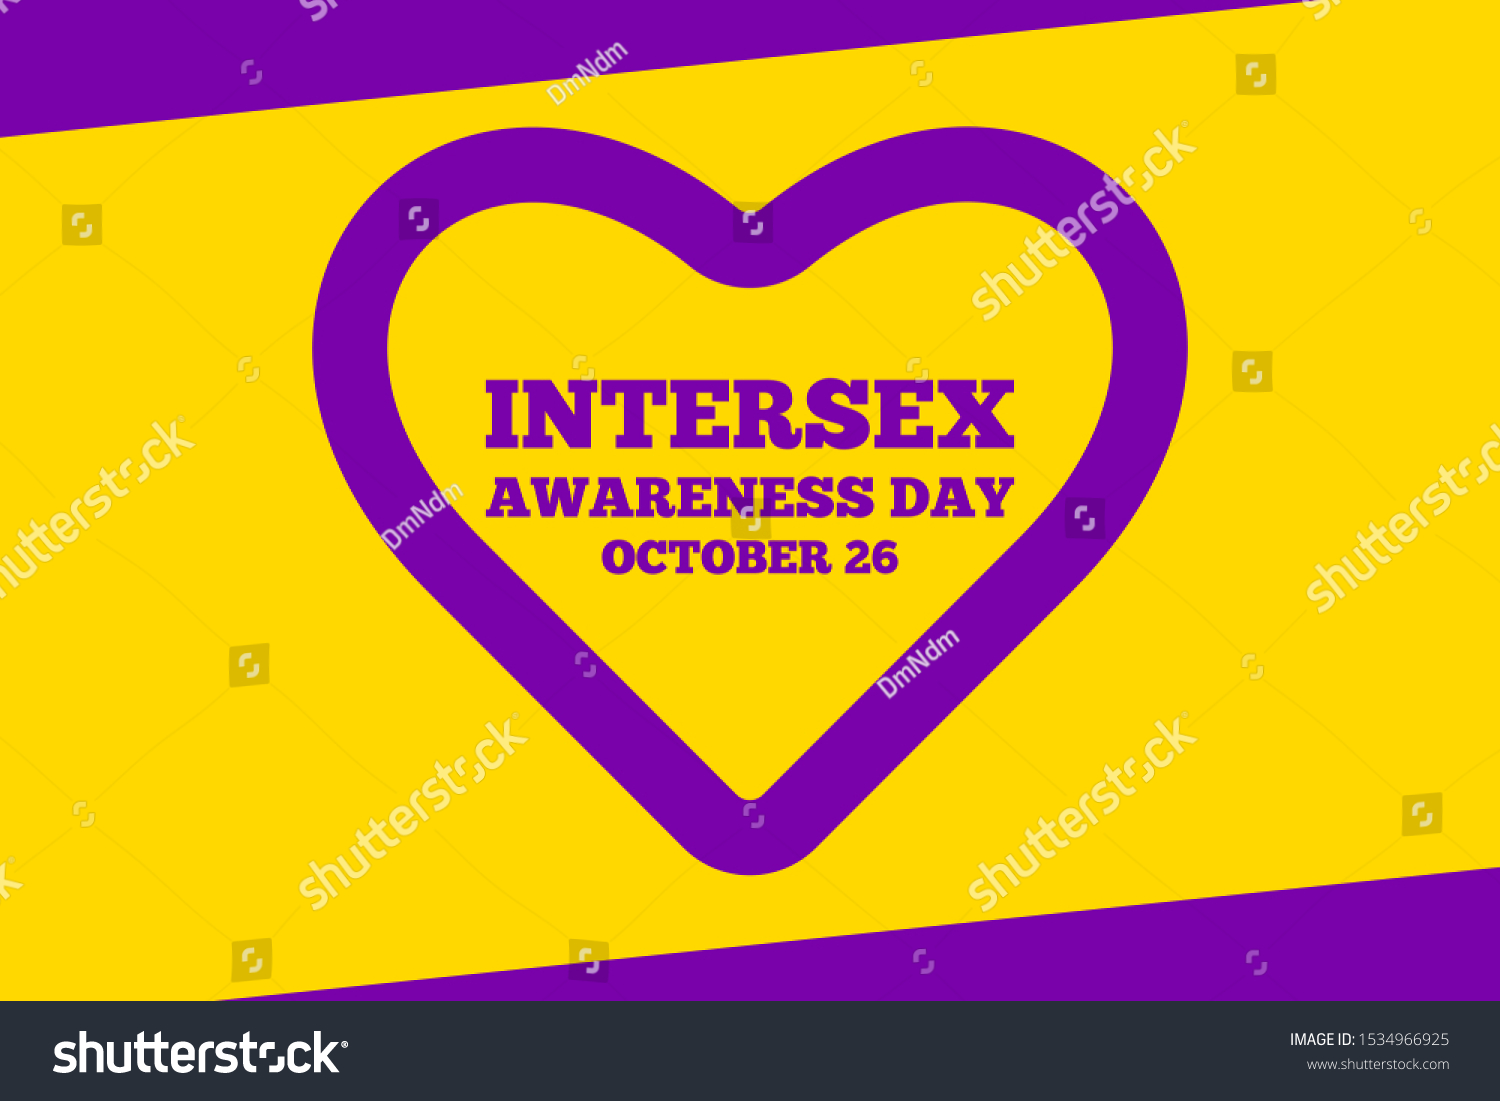 26th October Intersex Awareness Day This Stock Vector Royalty Free 1534966925 Shutterstock